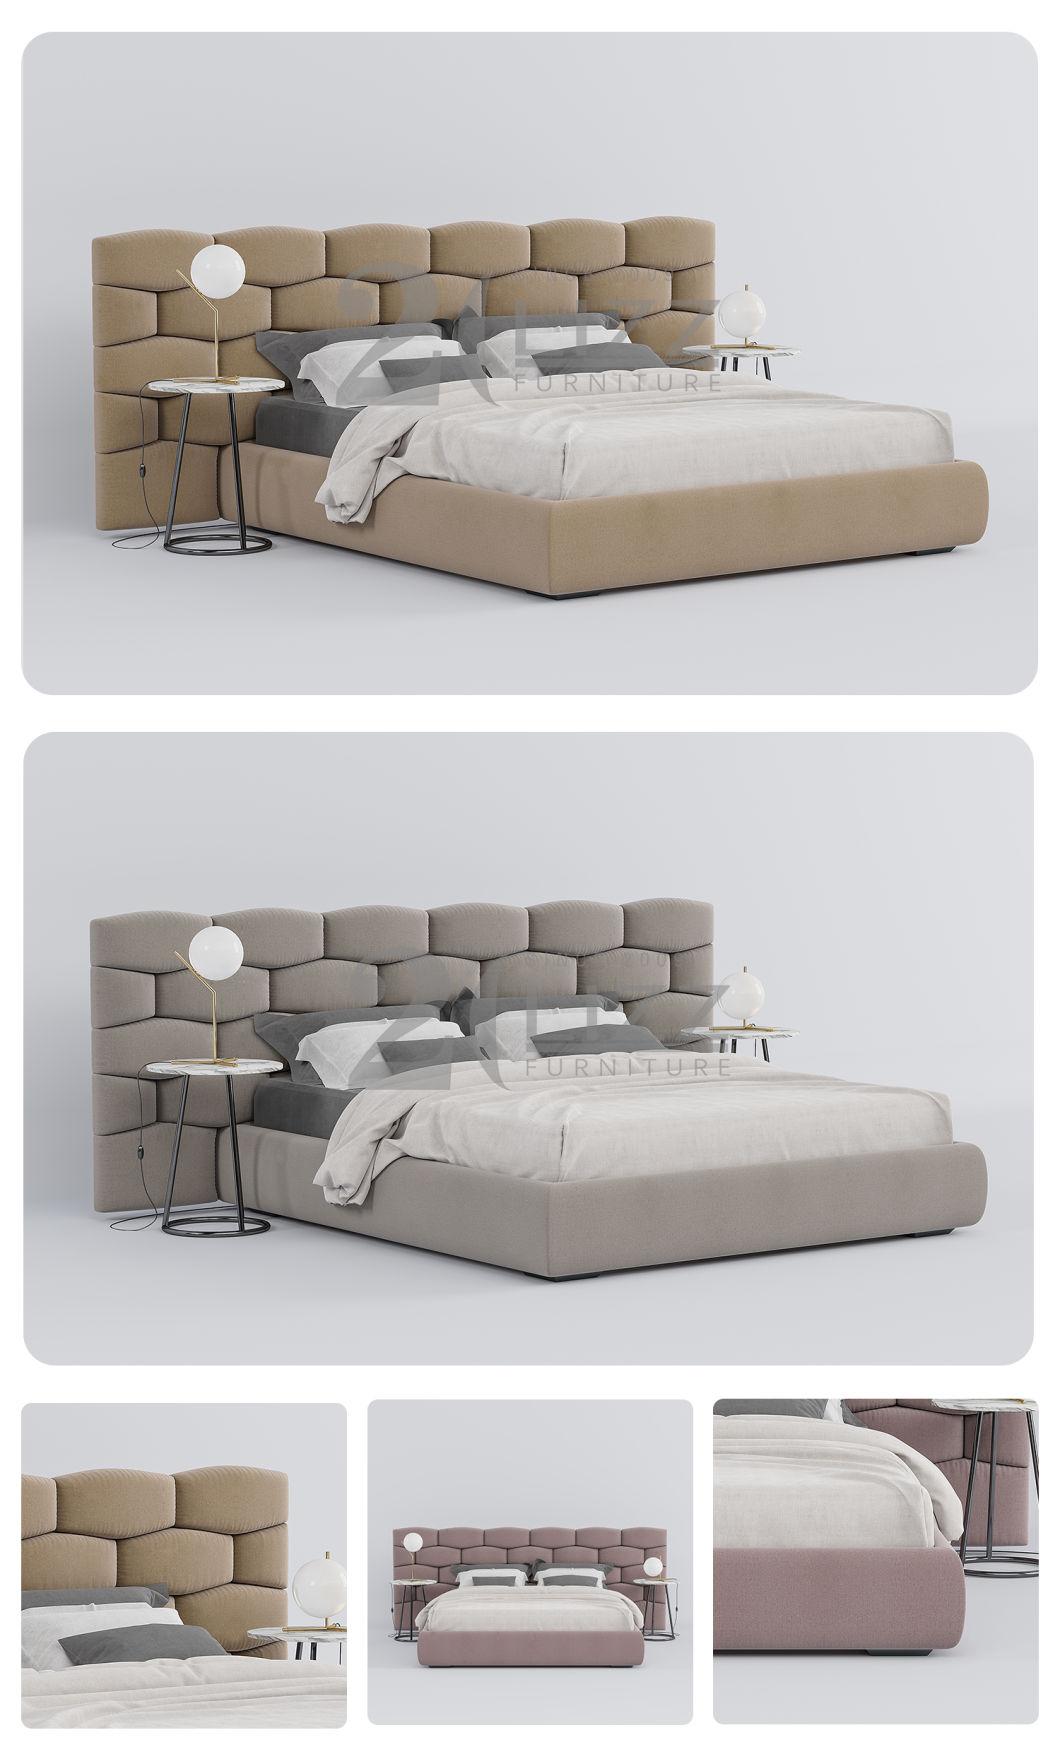 Hot Selling European Luxury Style Bedroom Furniture Set Simple Fabric Upholestery Bed with Headboard